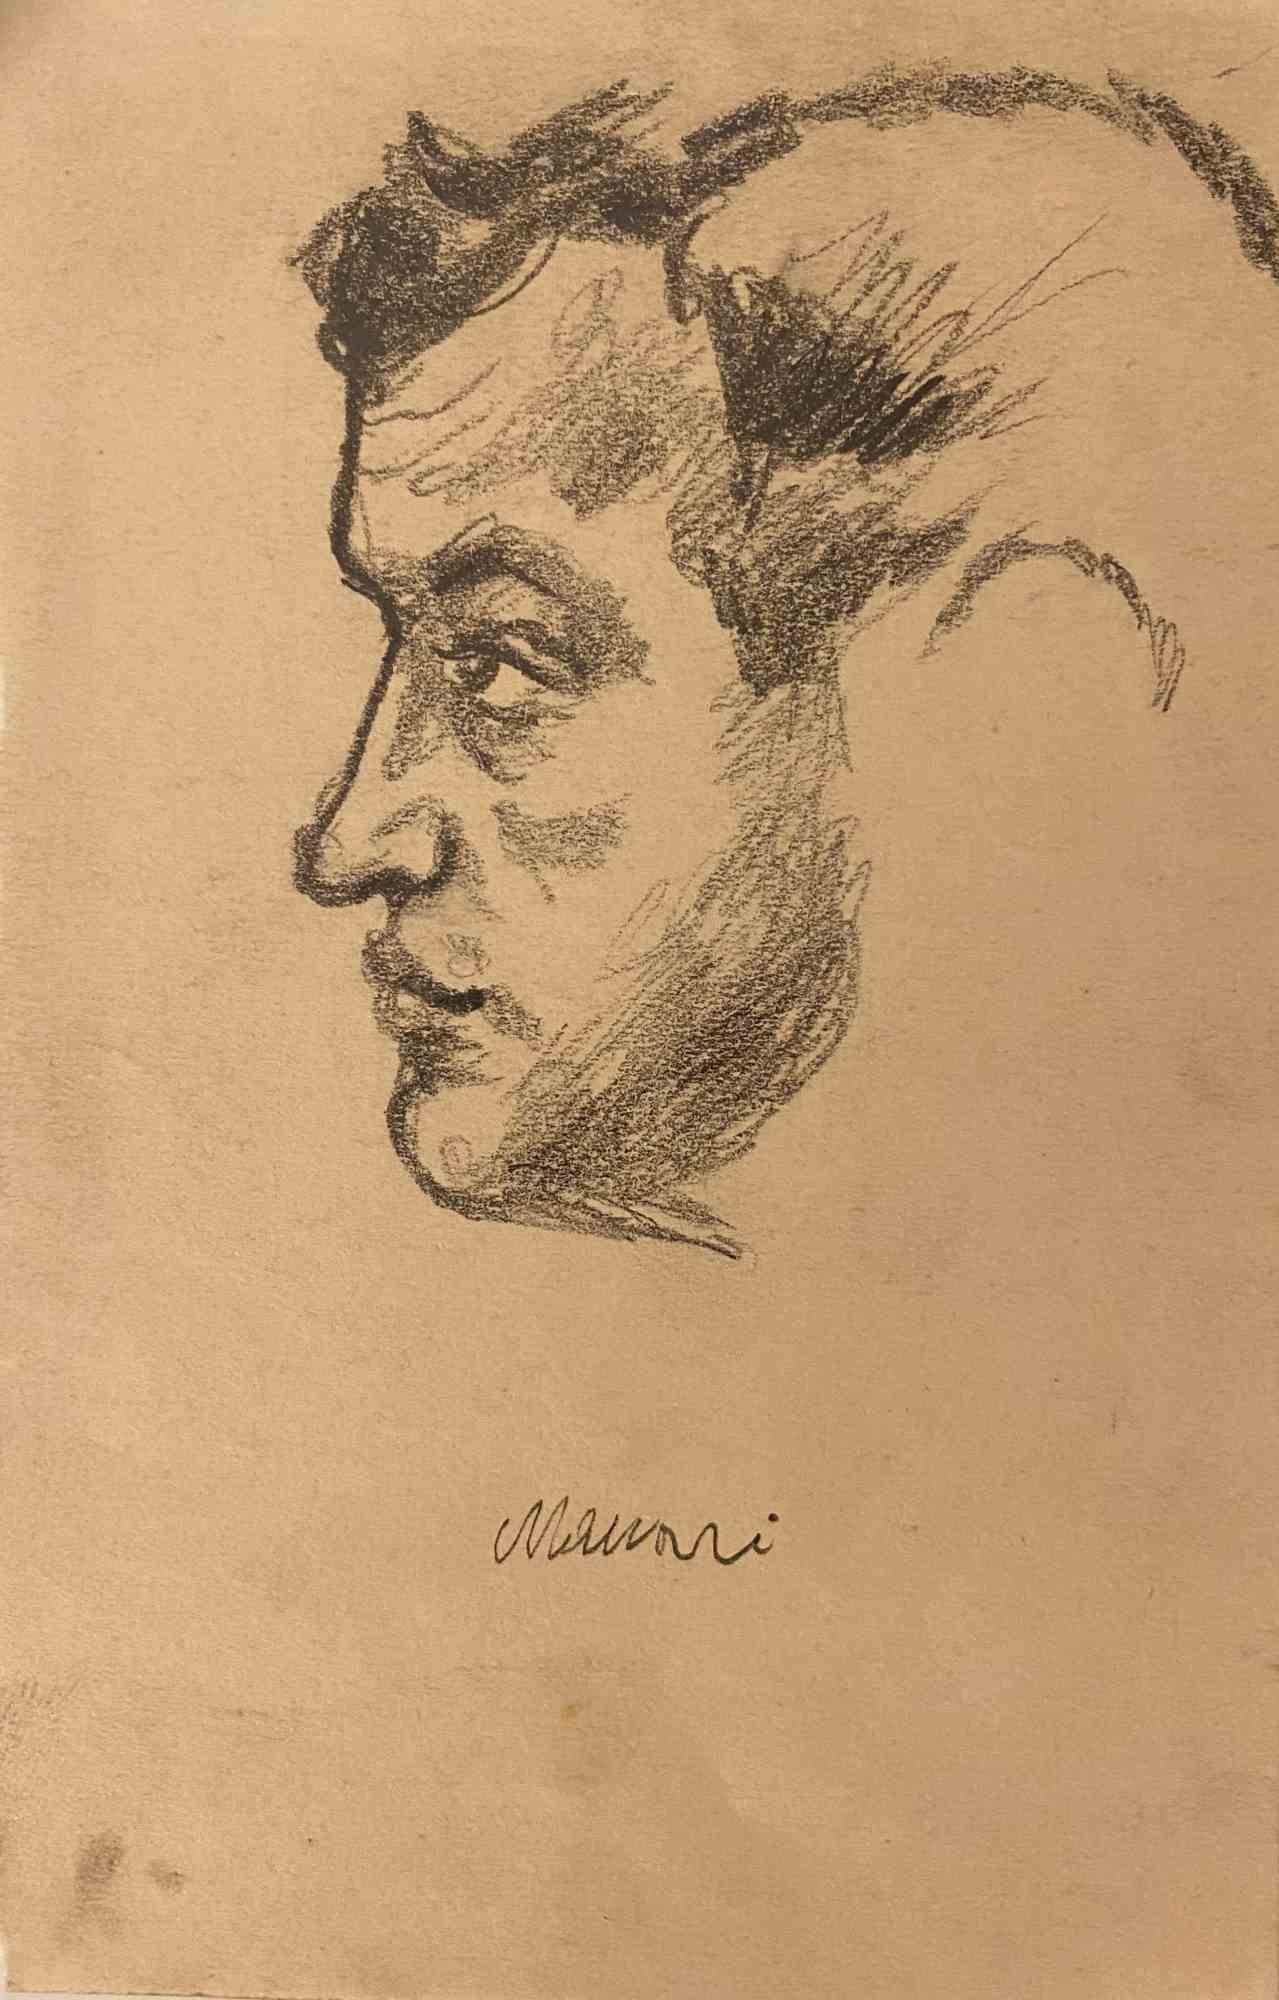 Profile is an Original Drawing in pencil carbon on creamy-colored paper realized by Mino Maccari in the mid-20th century. 

Hand-signed by the artist on the lower. 

Good conditions.

Mino Maccari (1898-1989) was an Italian writer, painter,